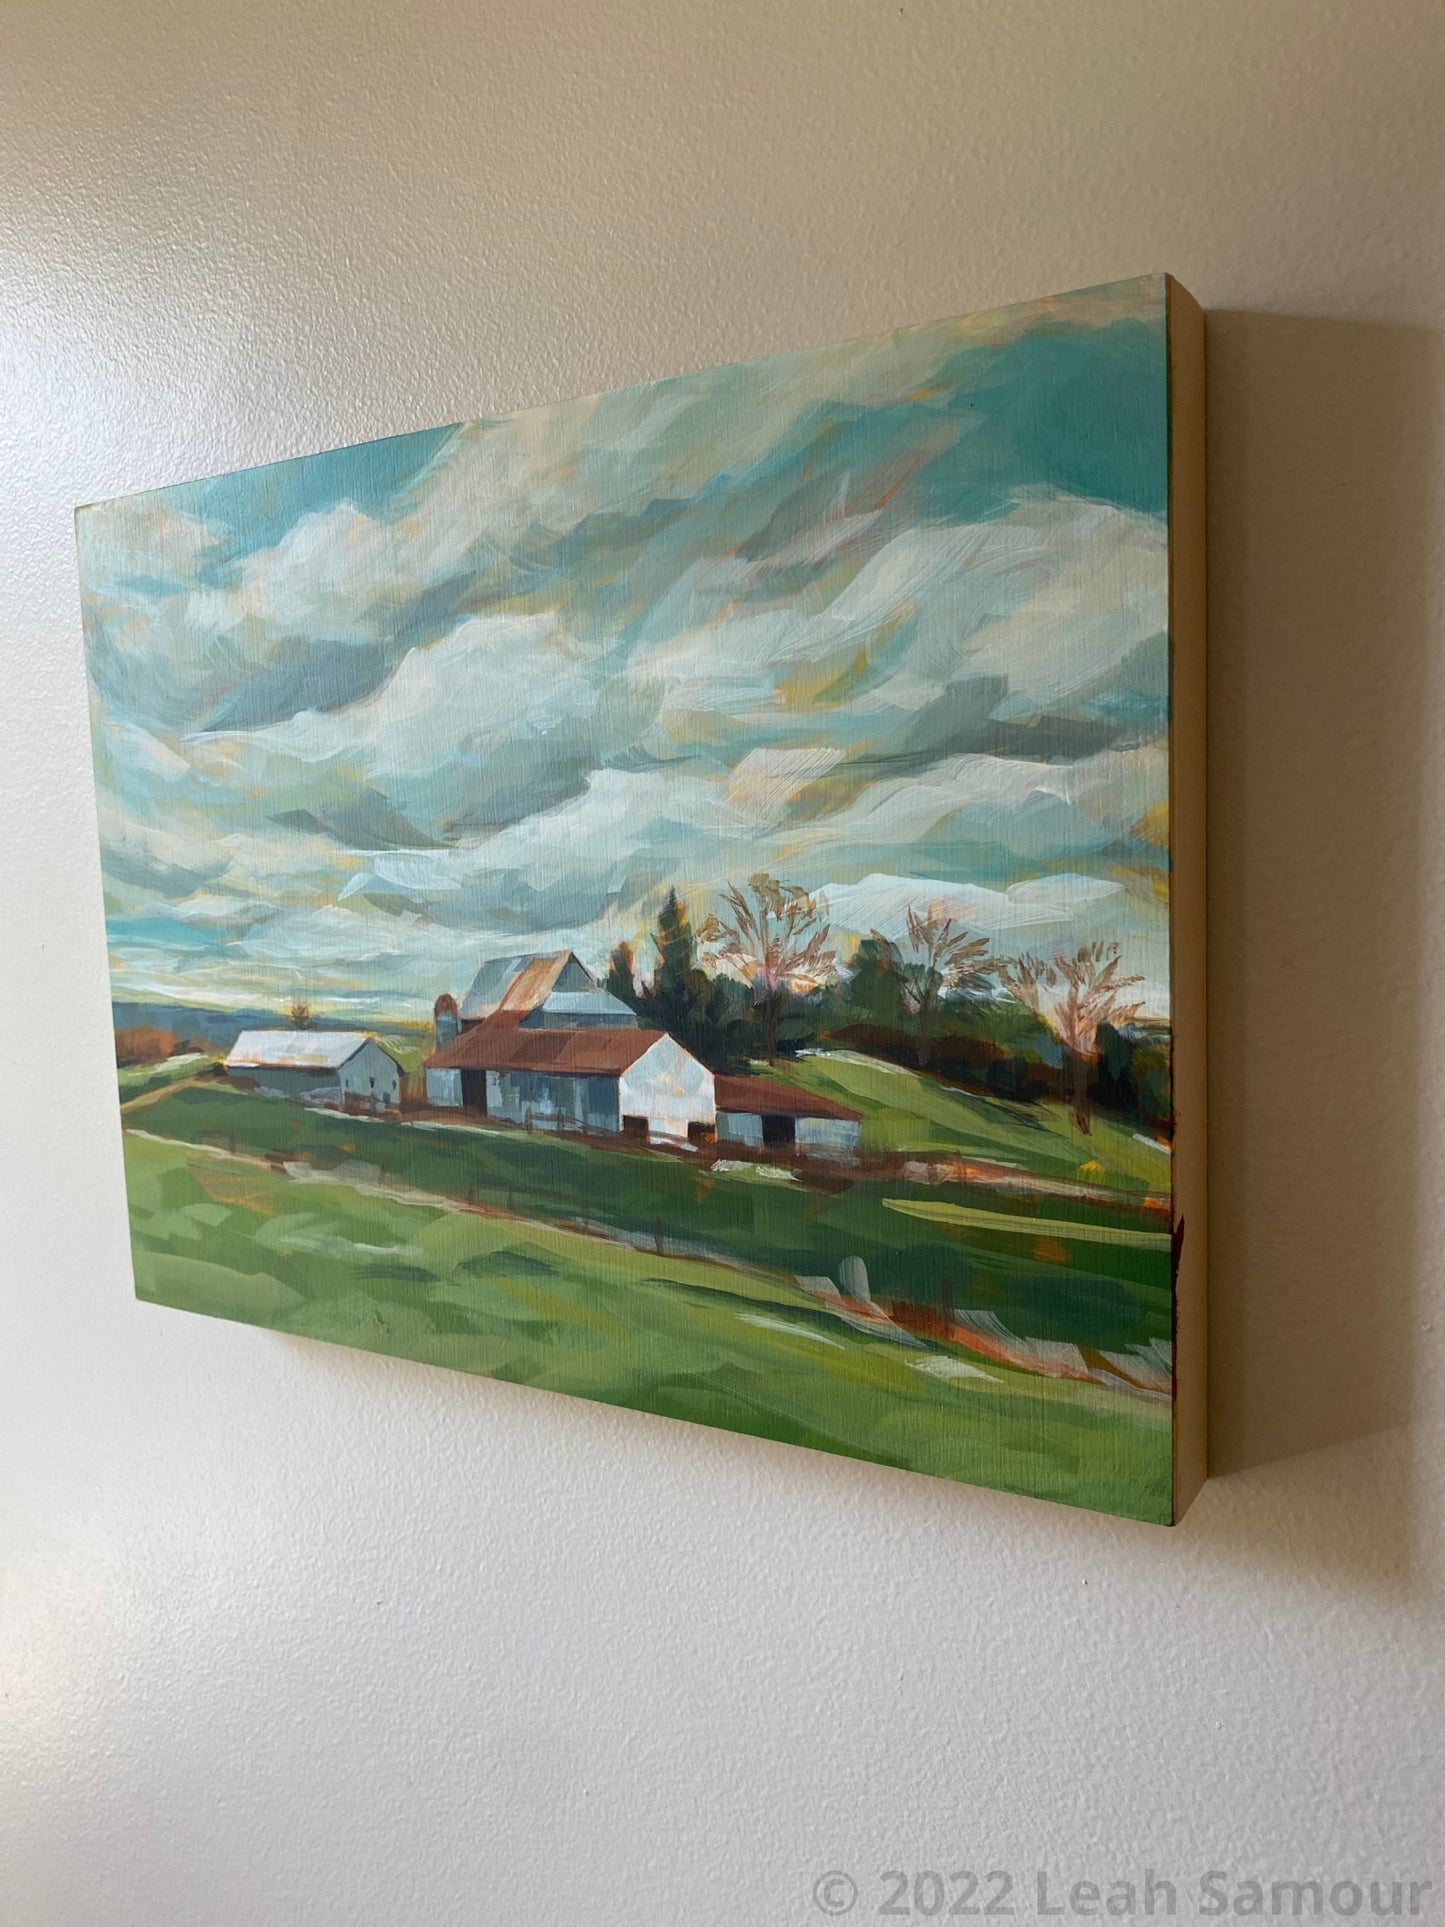 9x12 original framed art for sale featuring a Barn On The Way To Beach Acrylic Painting Wood Panel